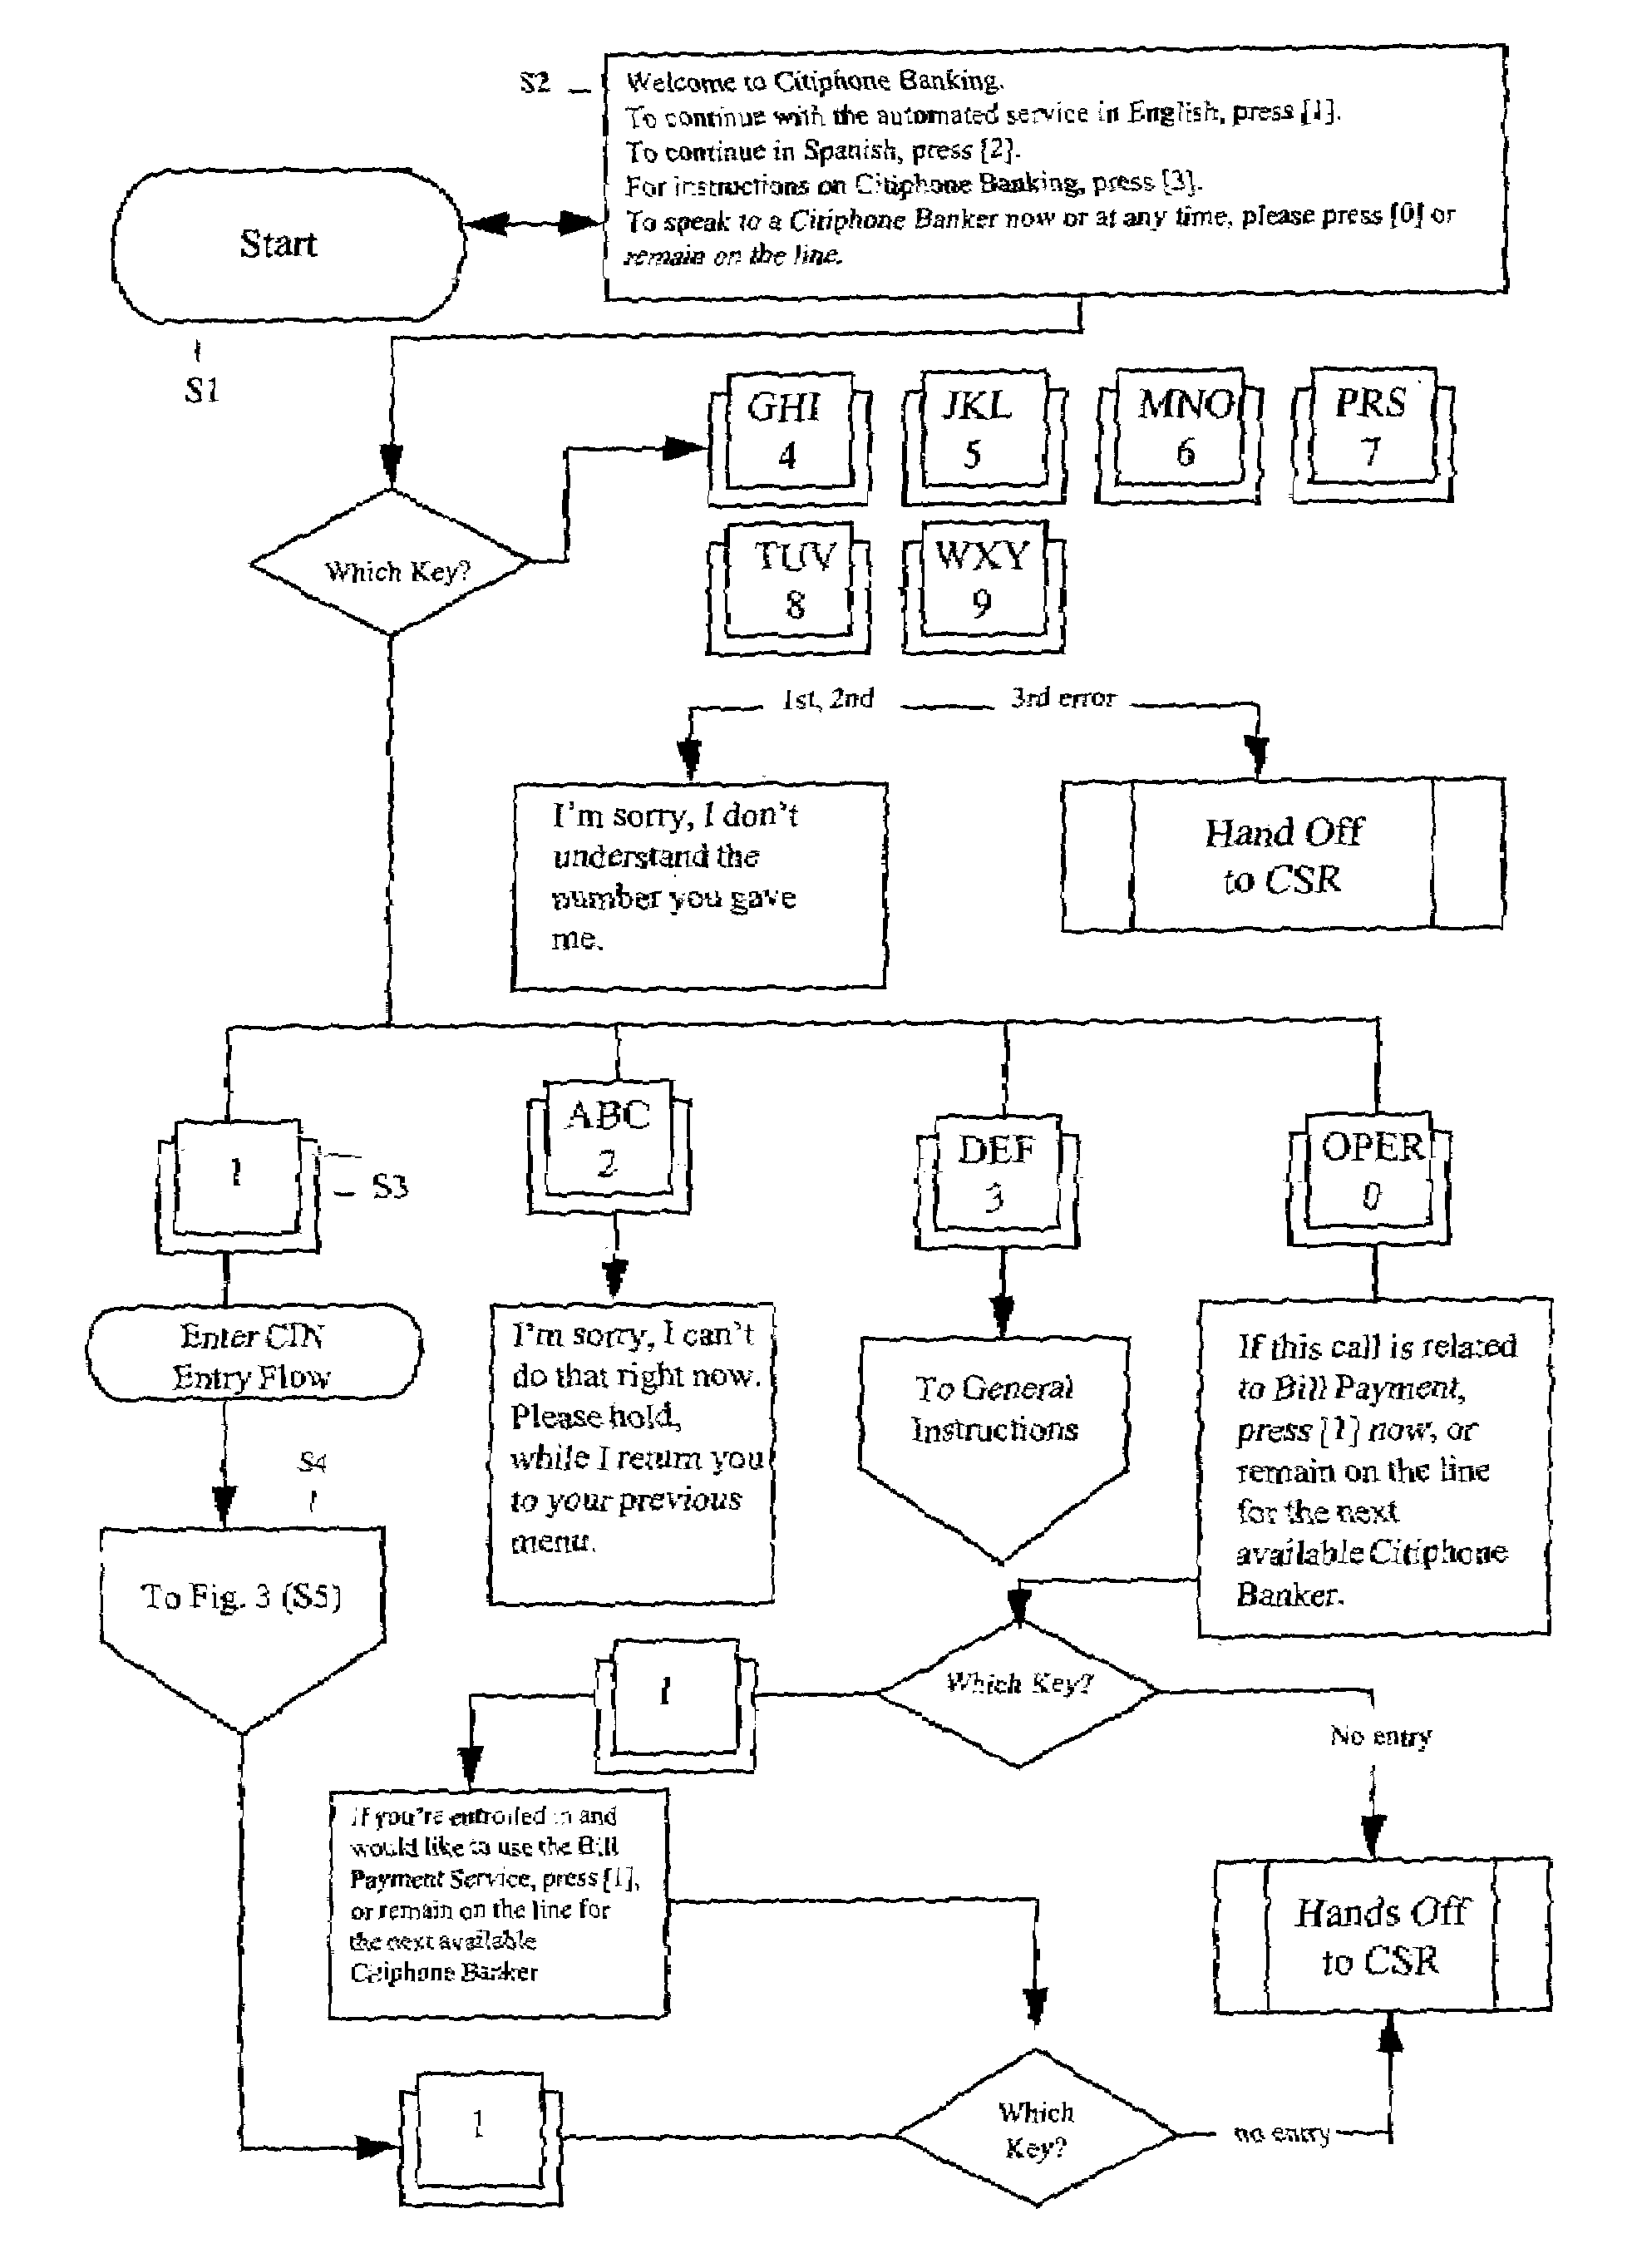 System and method for automated bill payment service